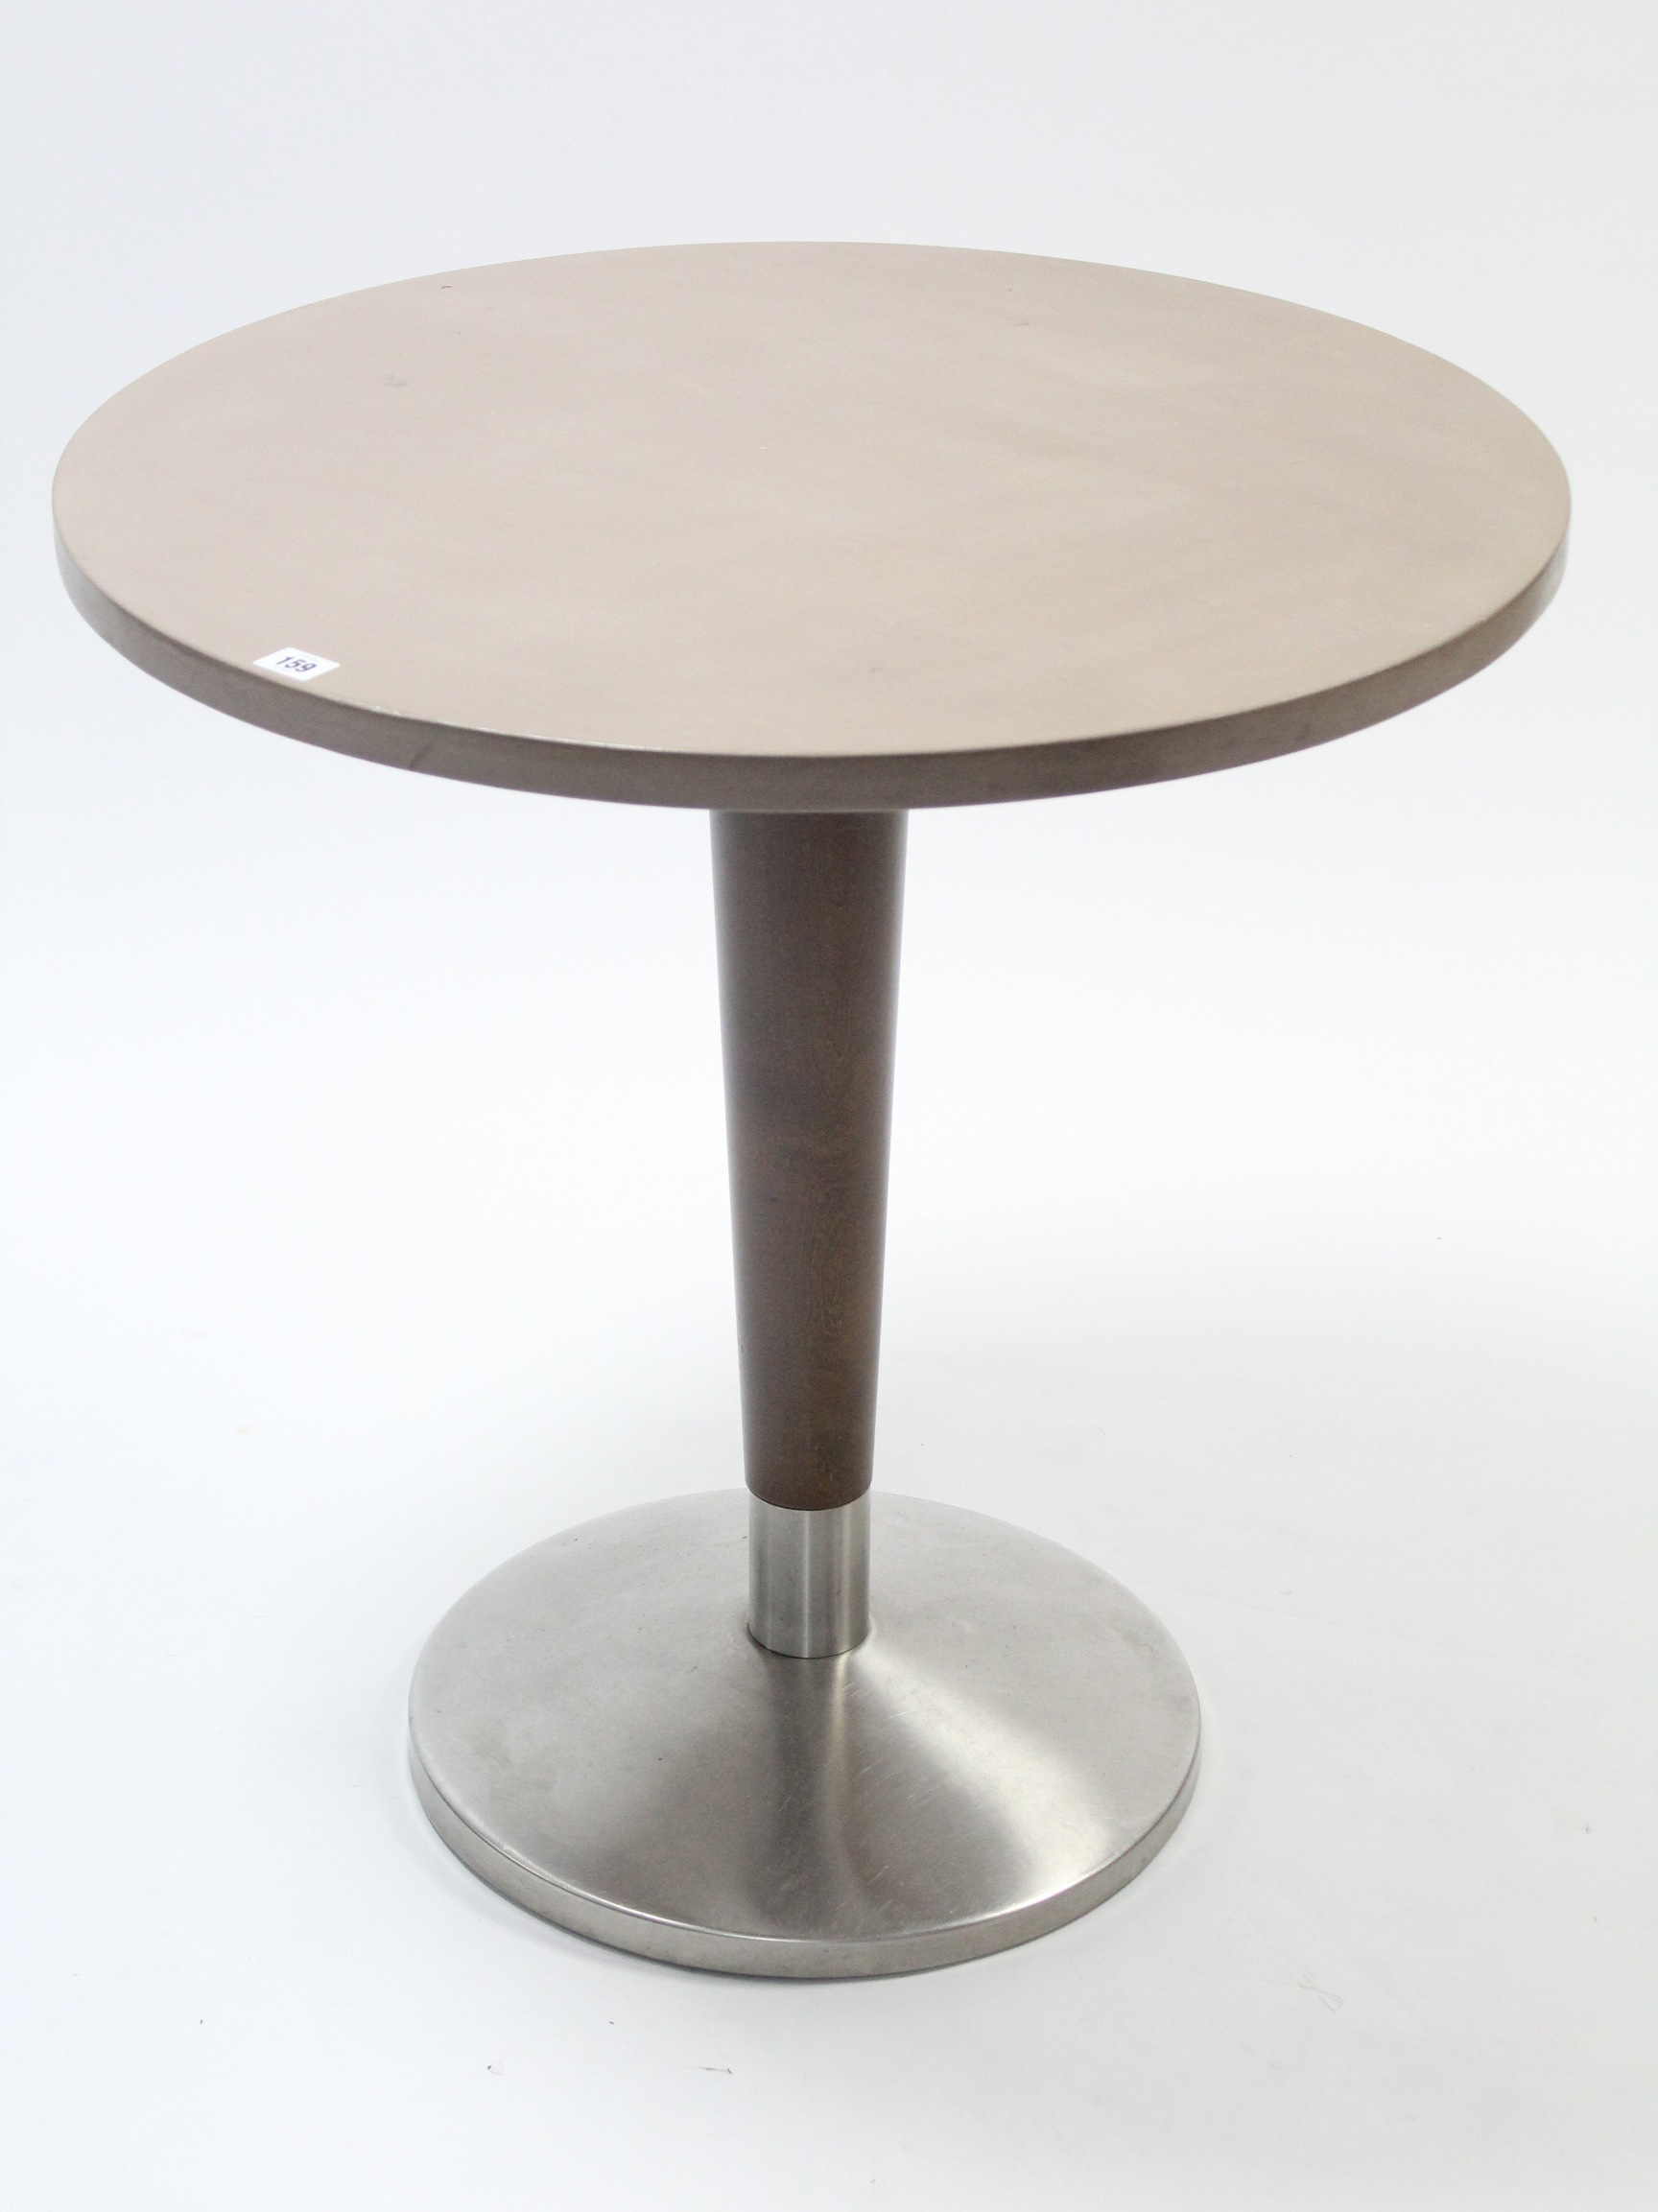 A chrome & dark brown finish kitchen table with light brown finish circular top, 27½” diameter.